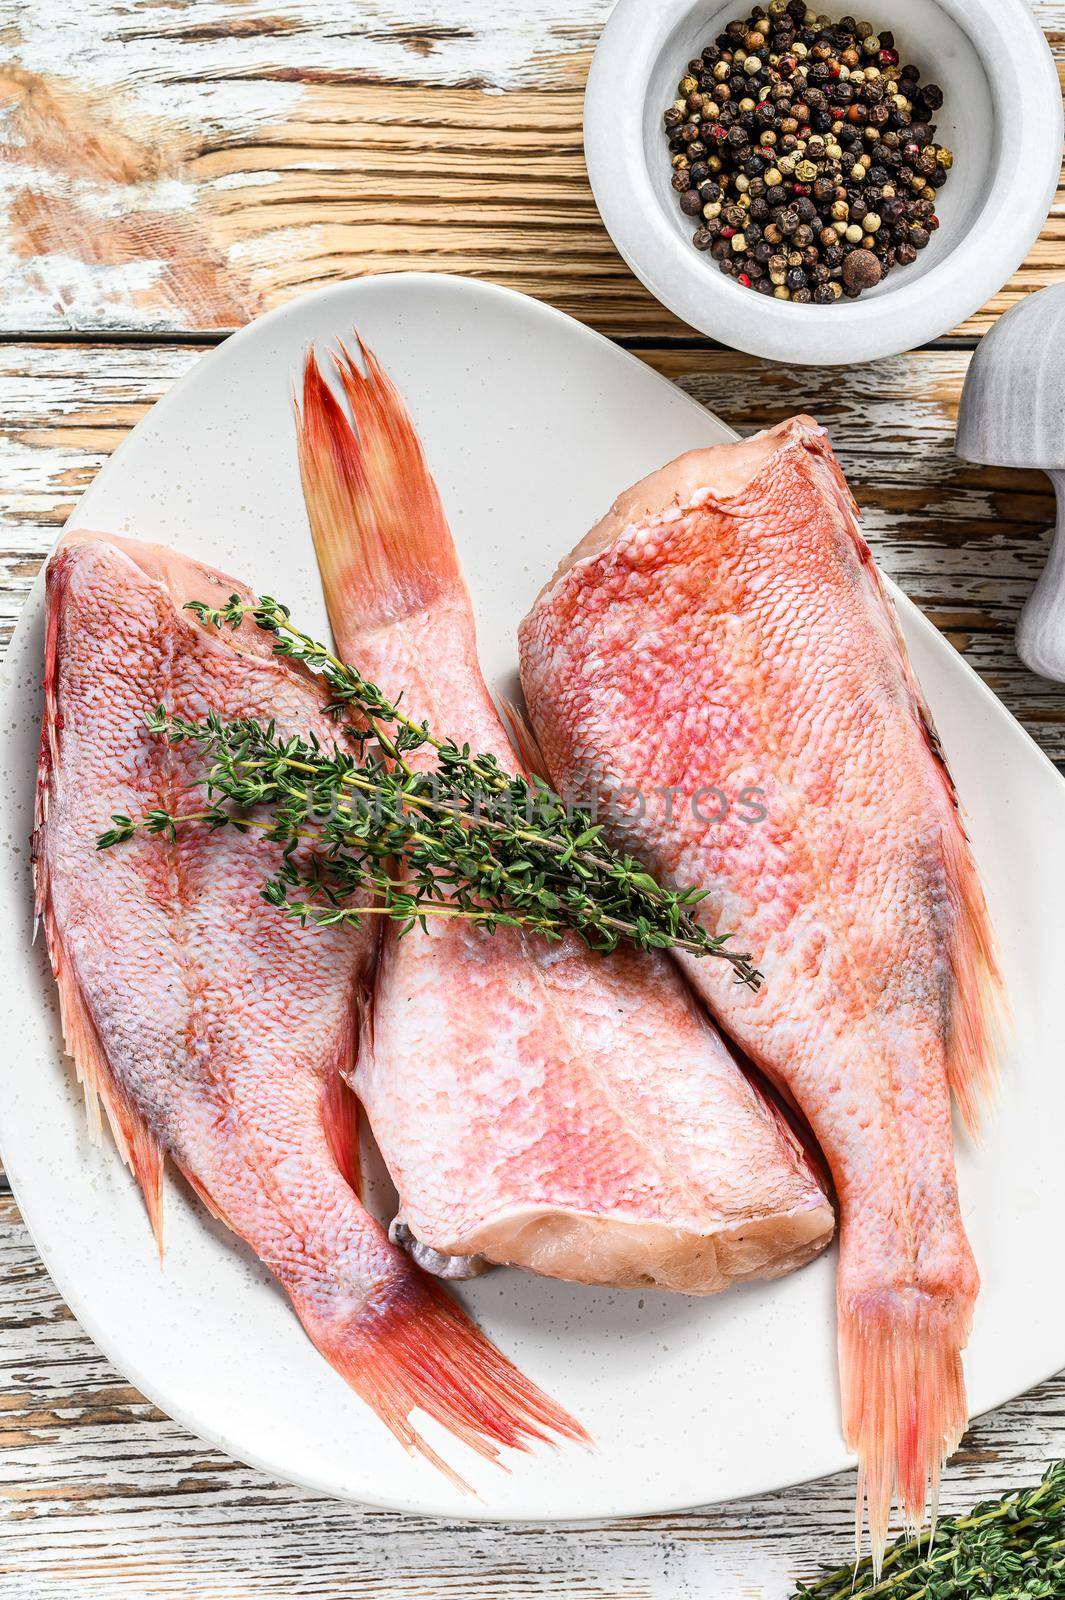 Whole raw red perch or sea bass fish on a plate. White wooden background. Top view by Composter